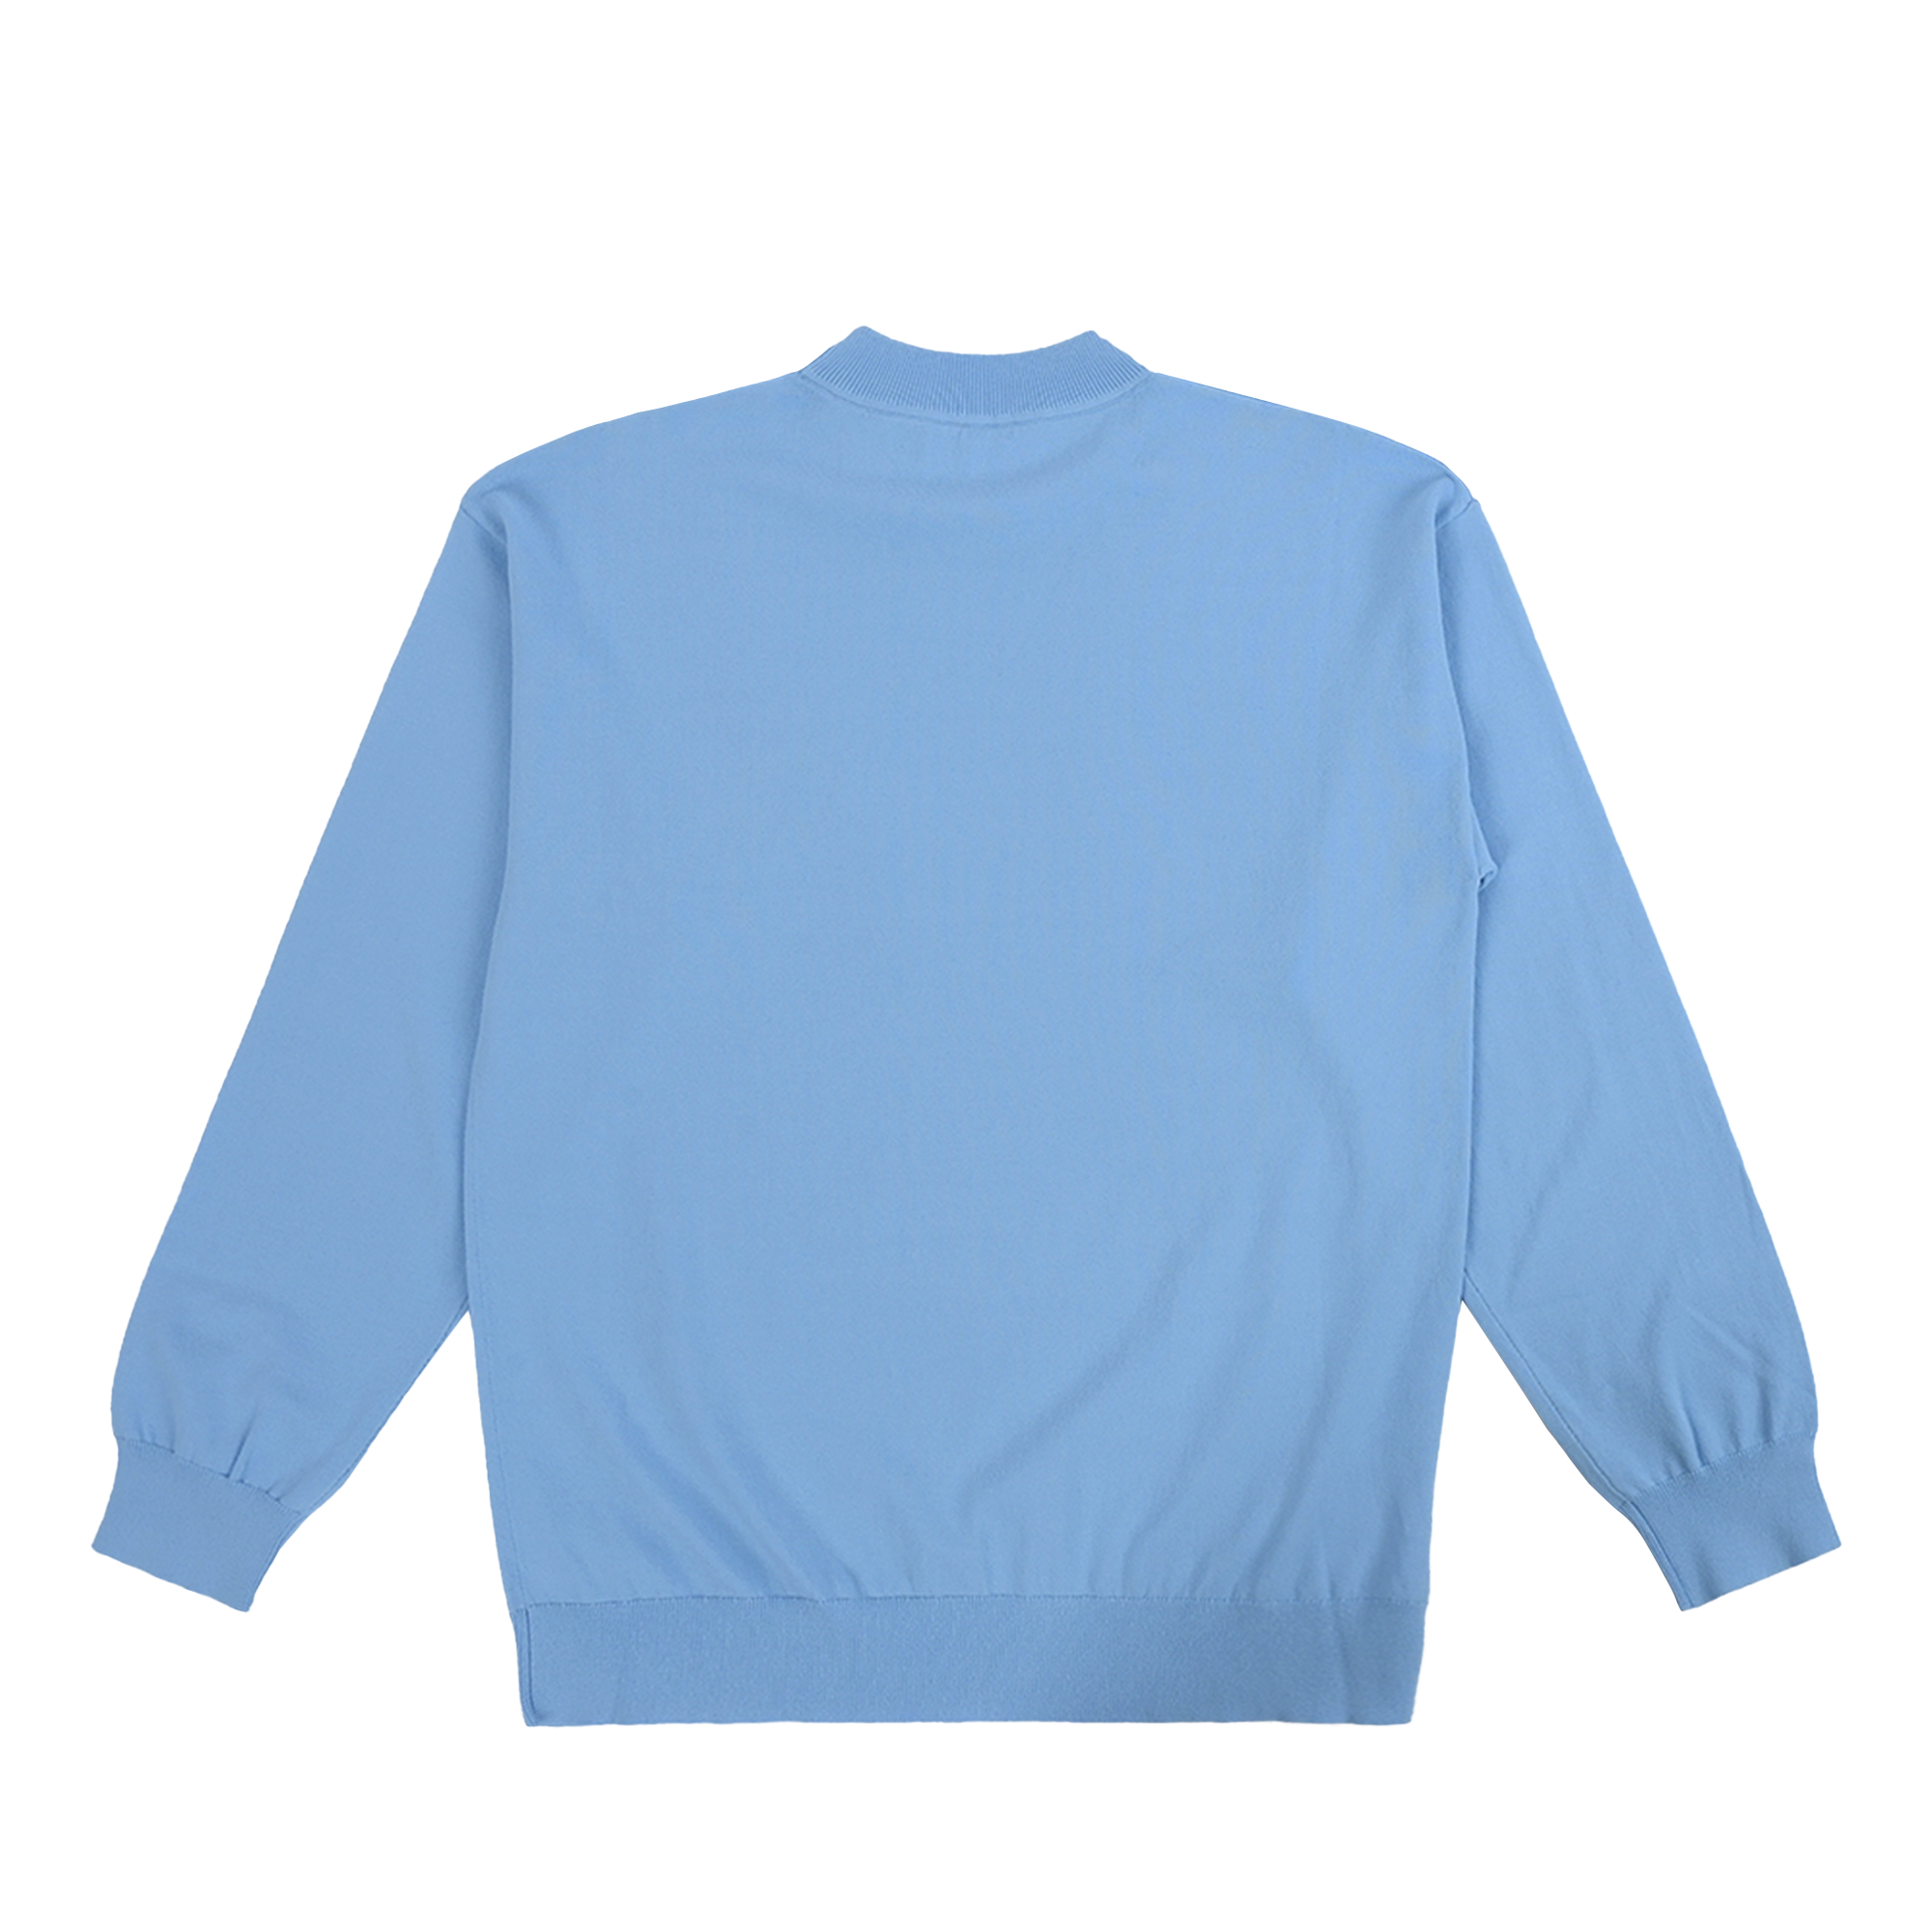 The Salvages 'Sublime' Knit Mockneck Pullover in Baby Blue